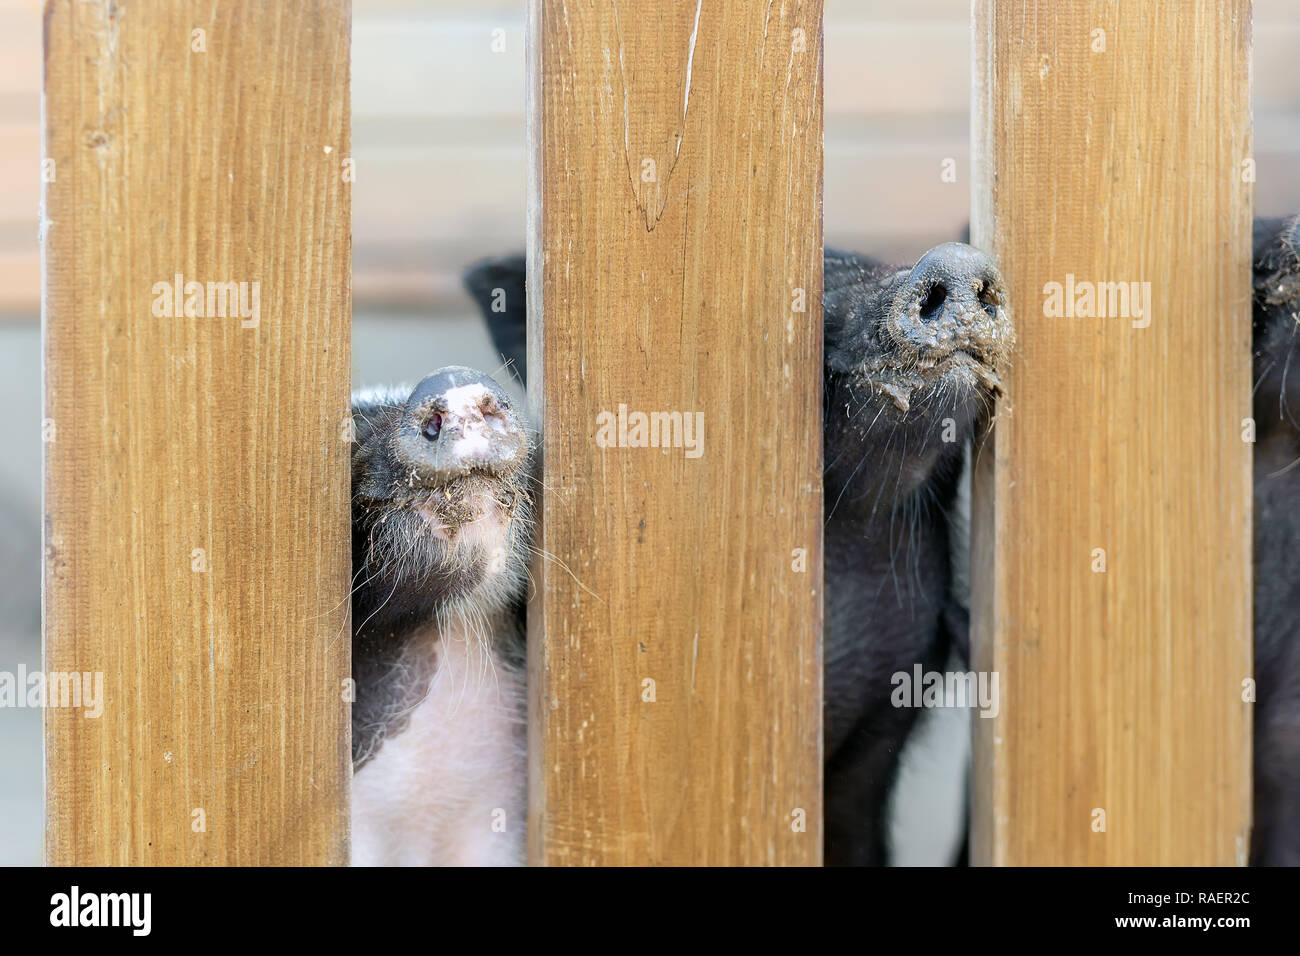 Lot of funny pig noses peeking through wooden fence at farm. Piglets sticking snouts . Intuition or instinct feeling concept. Stock Photo